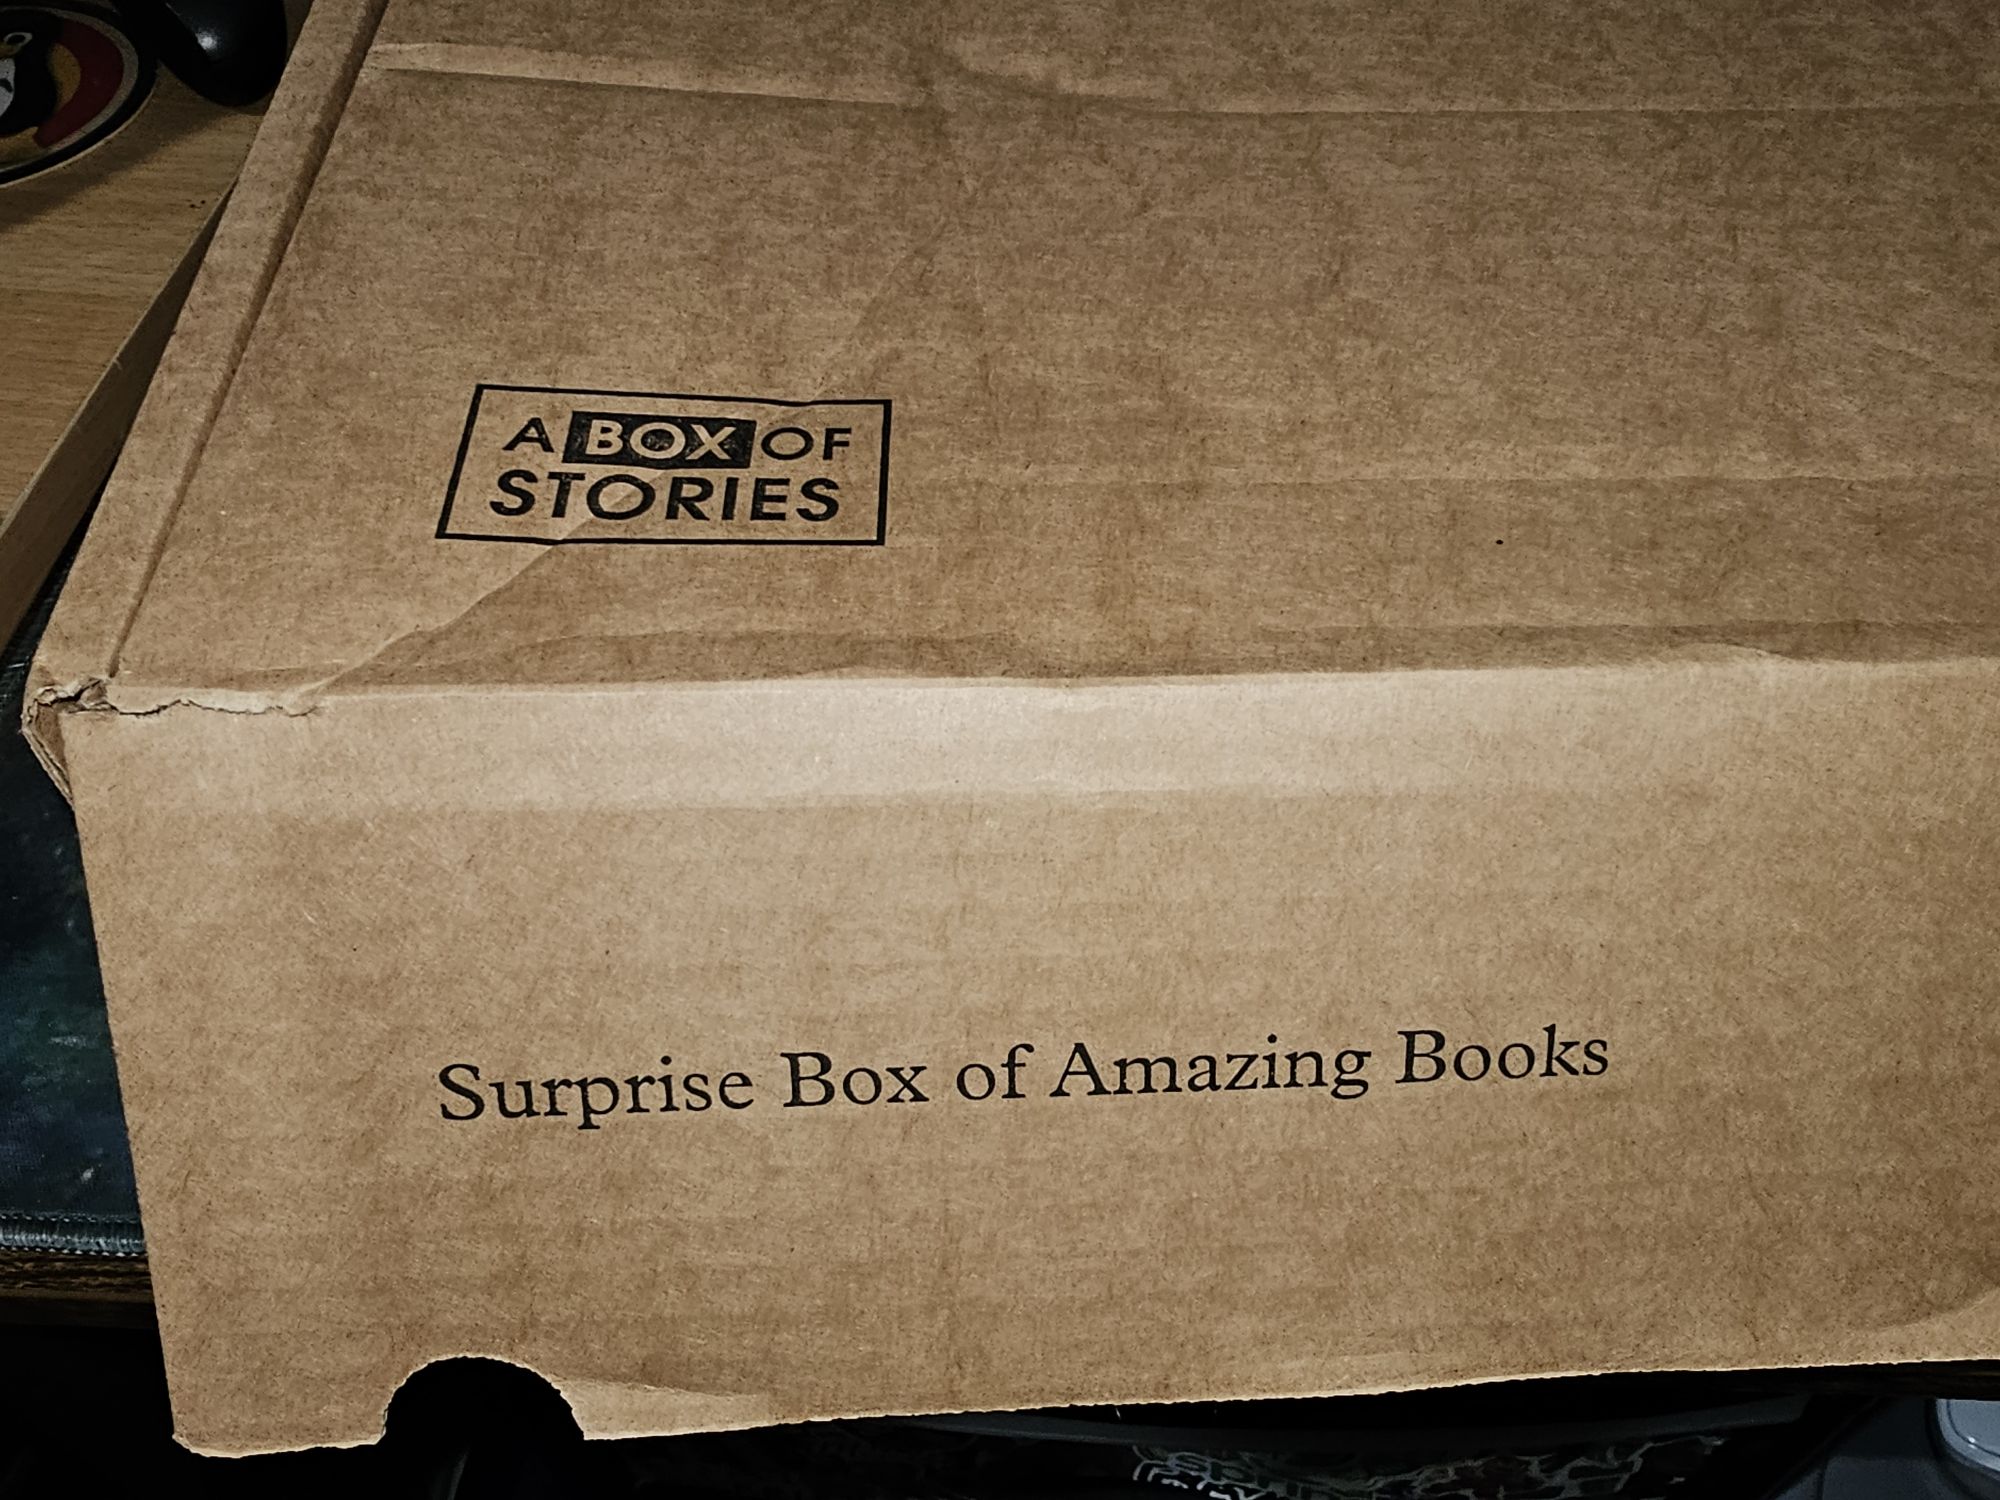 A Box of Stories Subscription Service